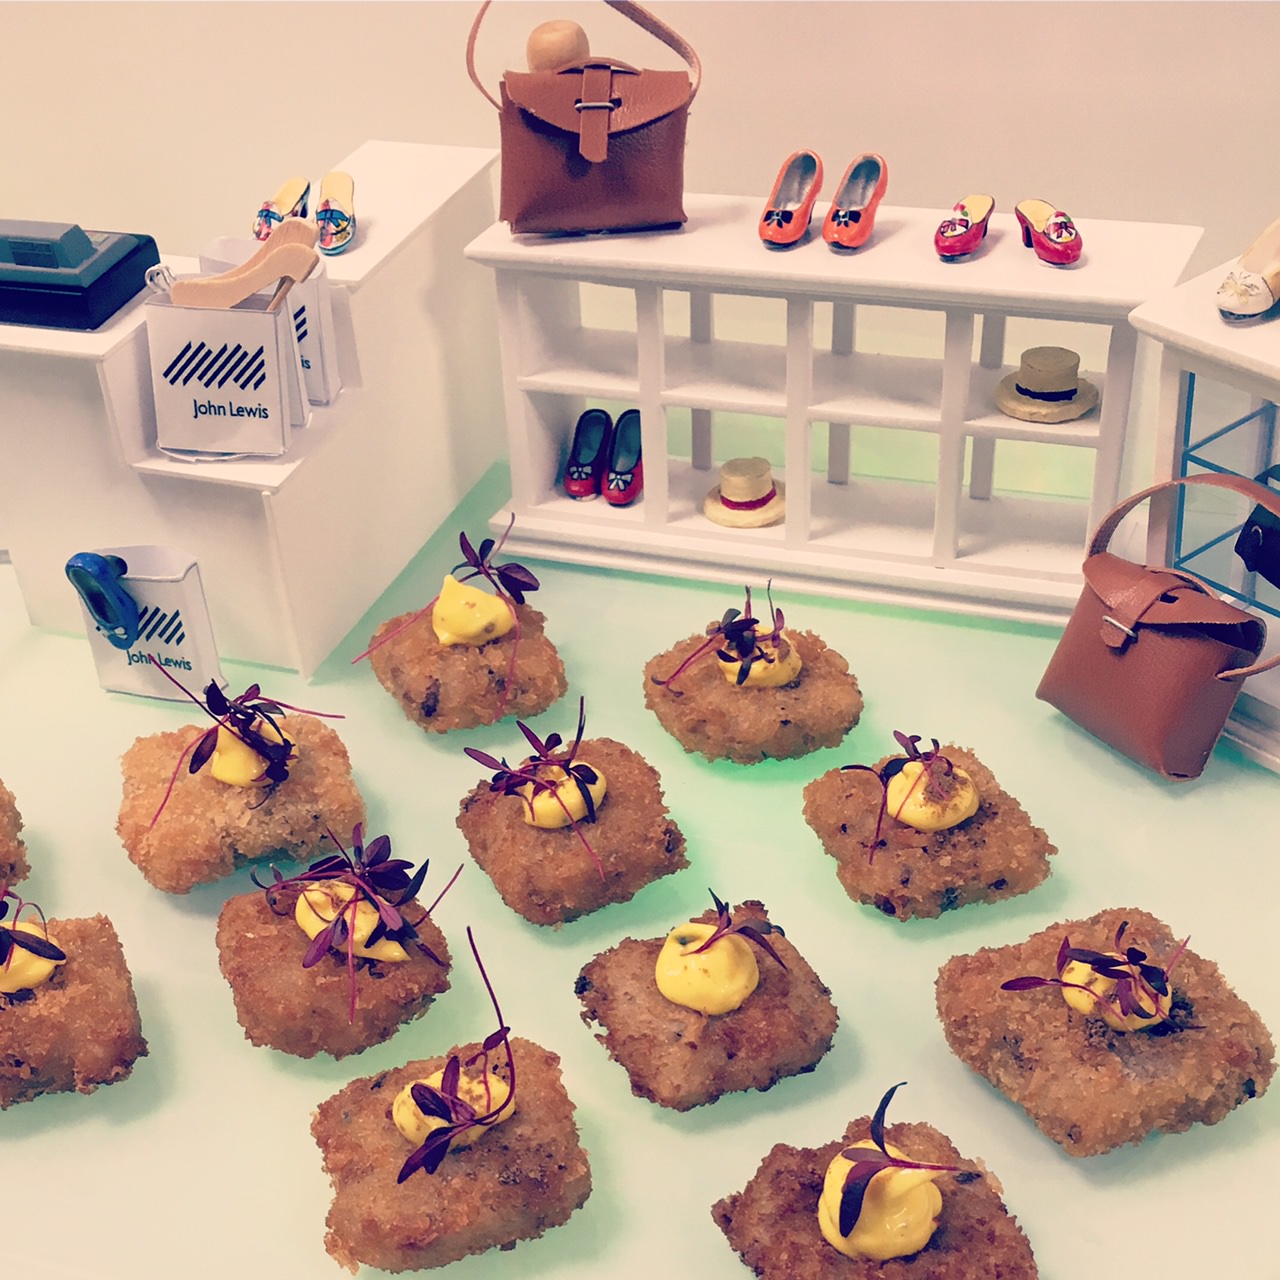 Canape Display for the John Lewis Leeds Launch